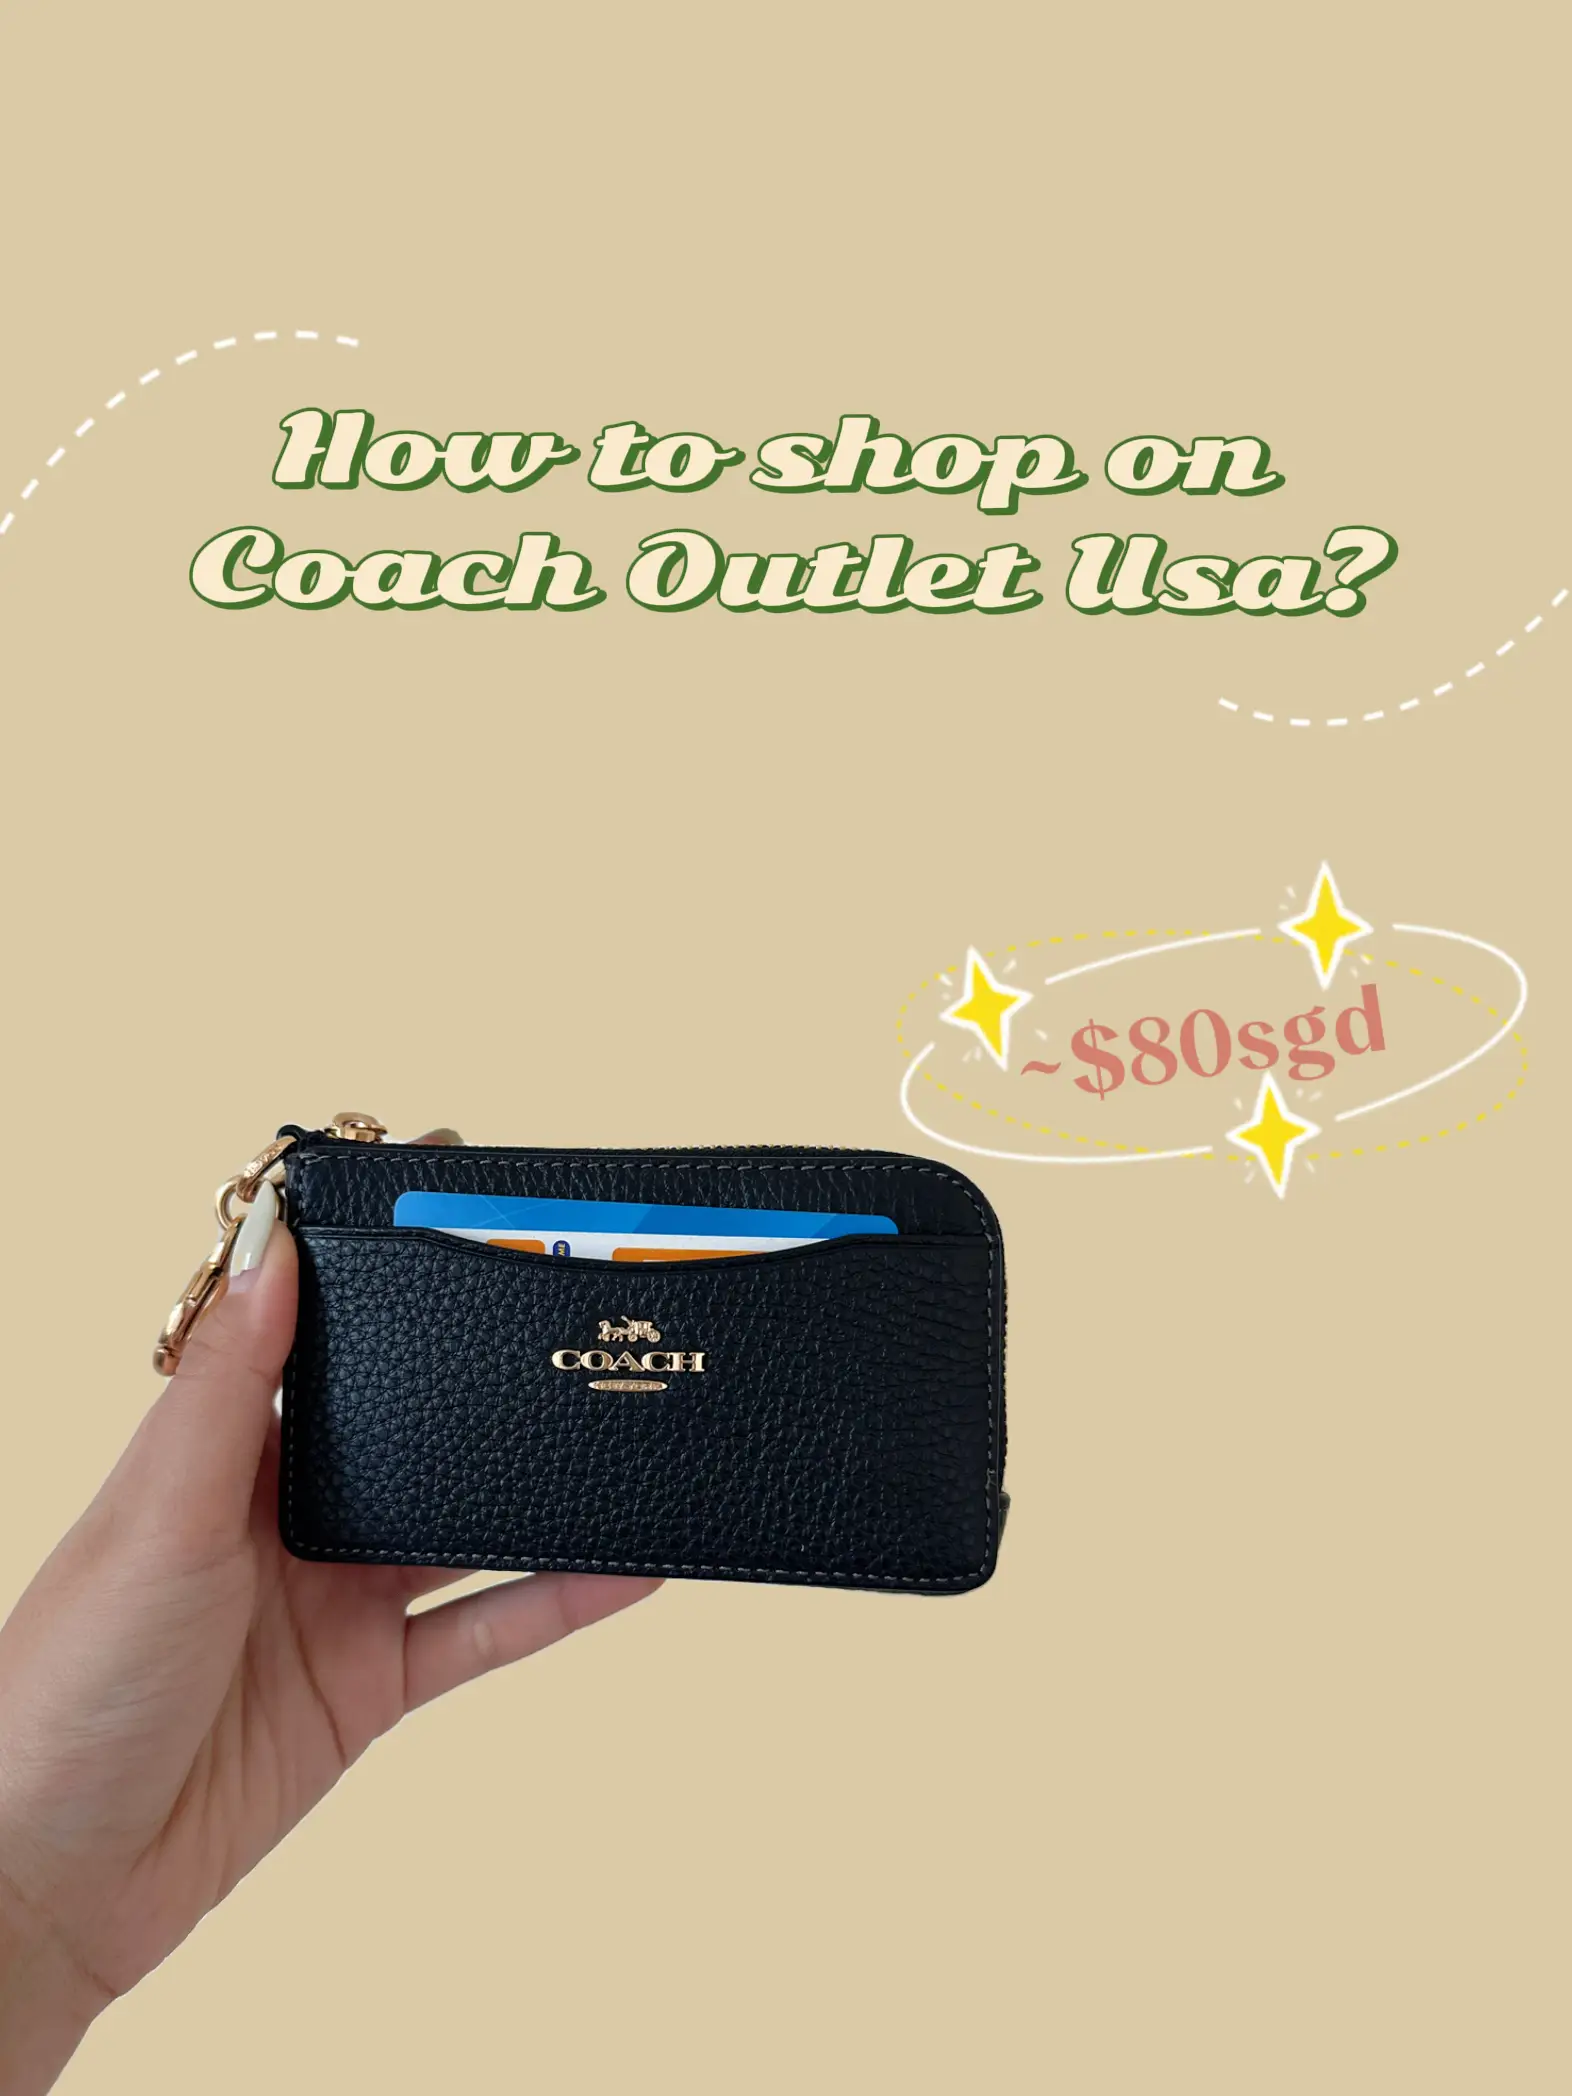 How to buy Coach at an affordable price? 🤑's images(0)